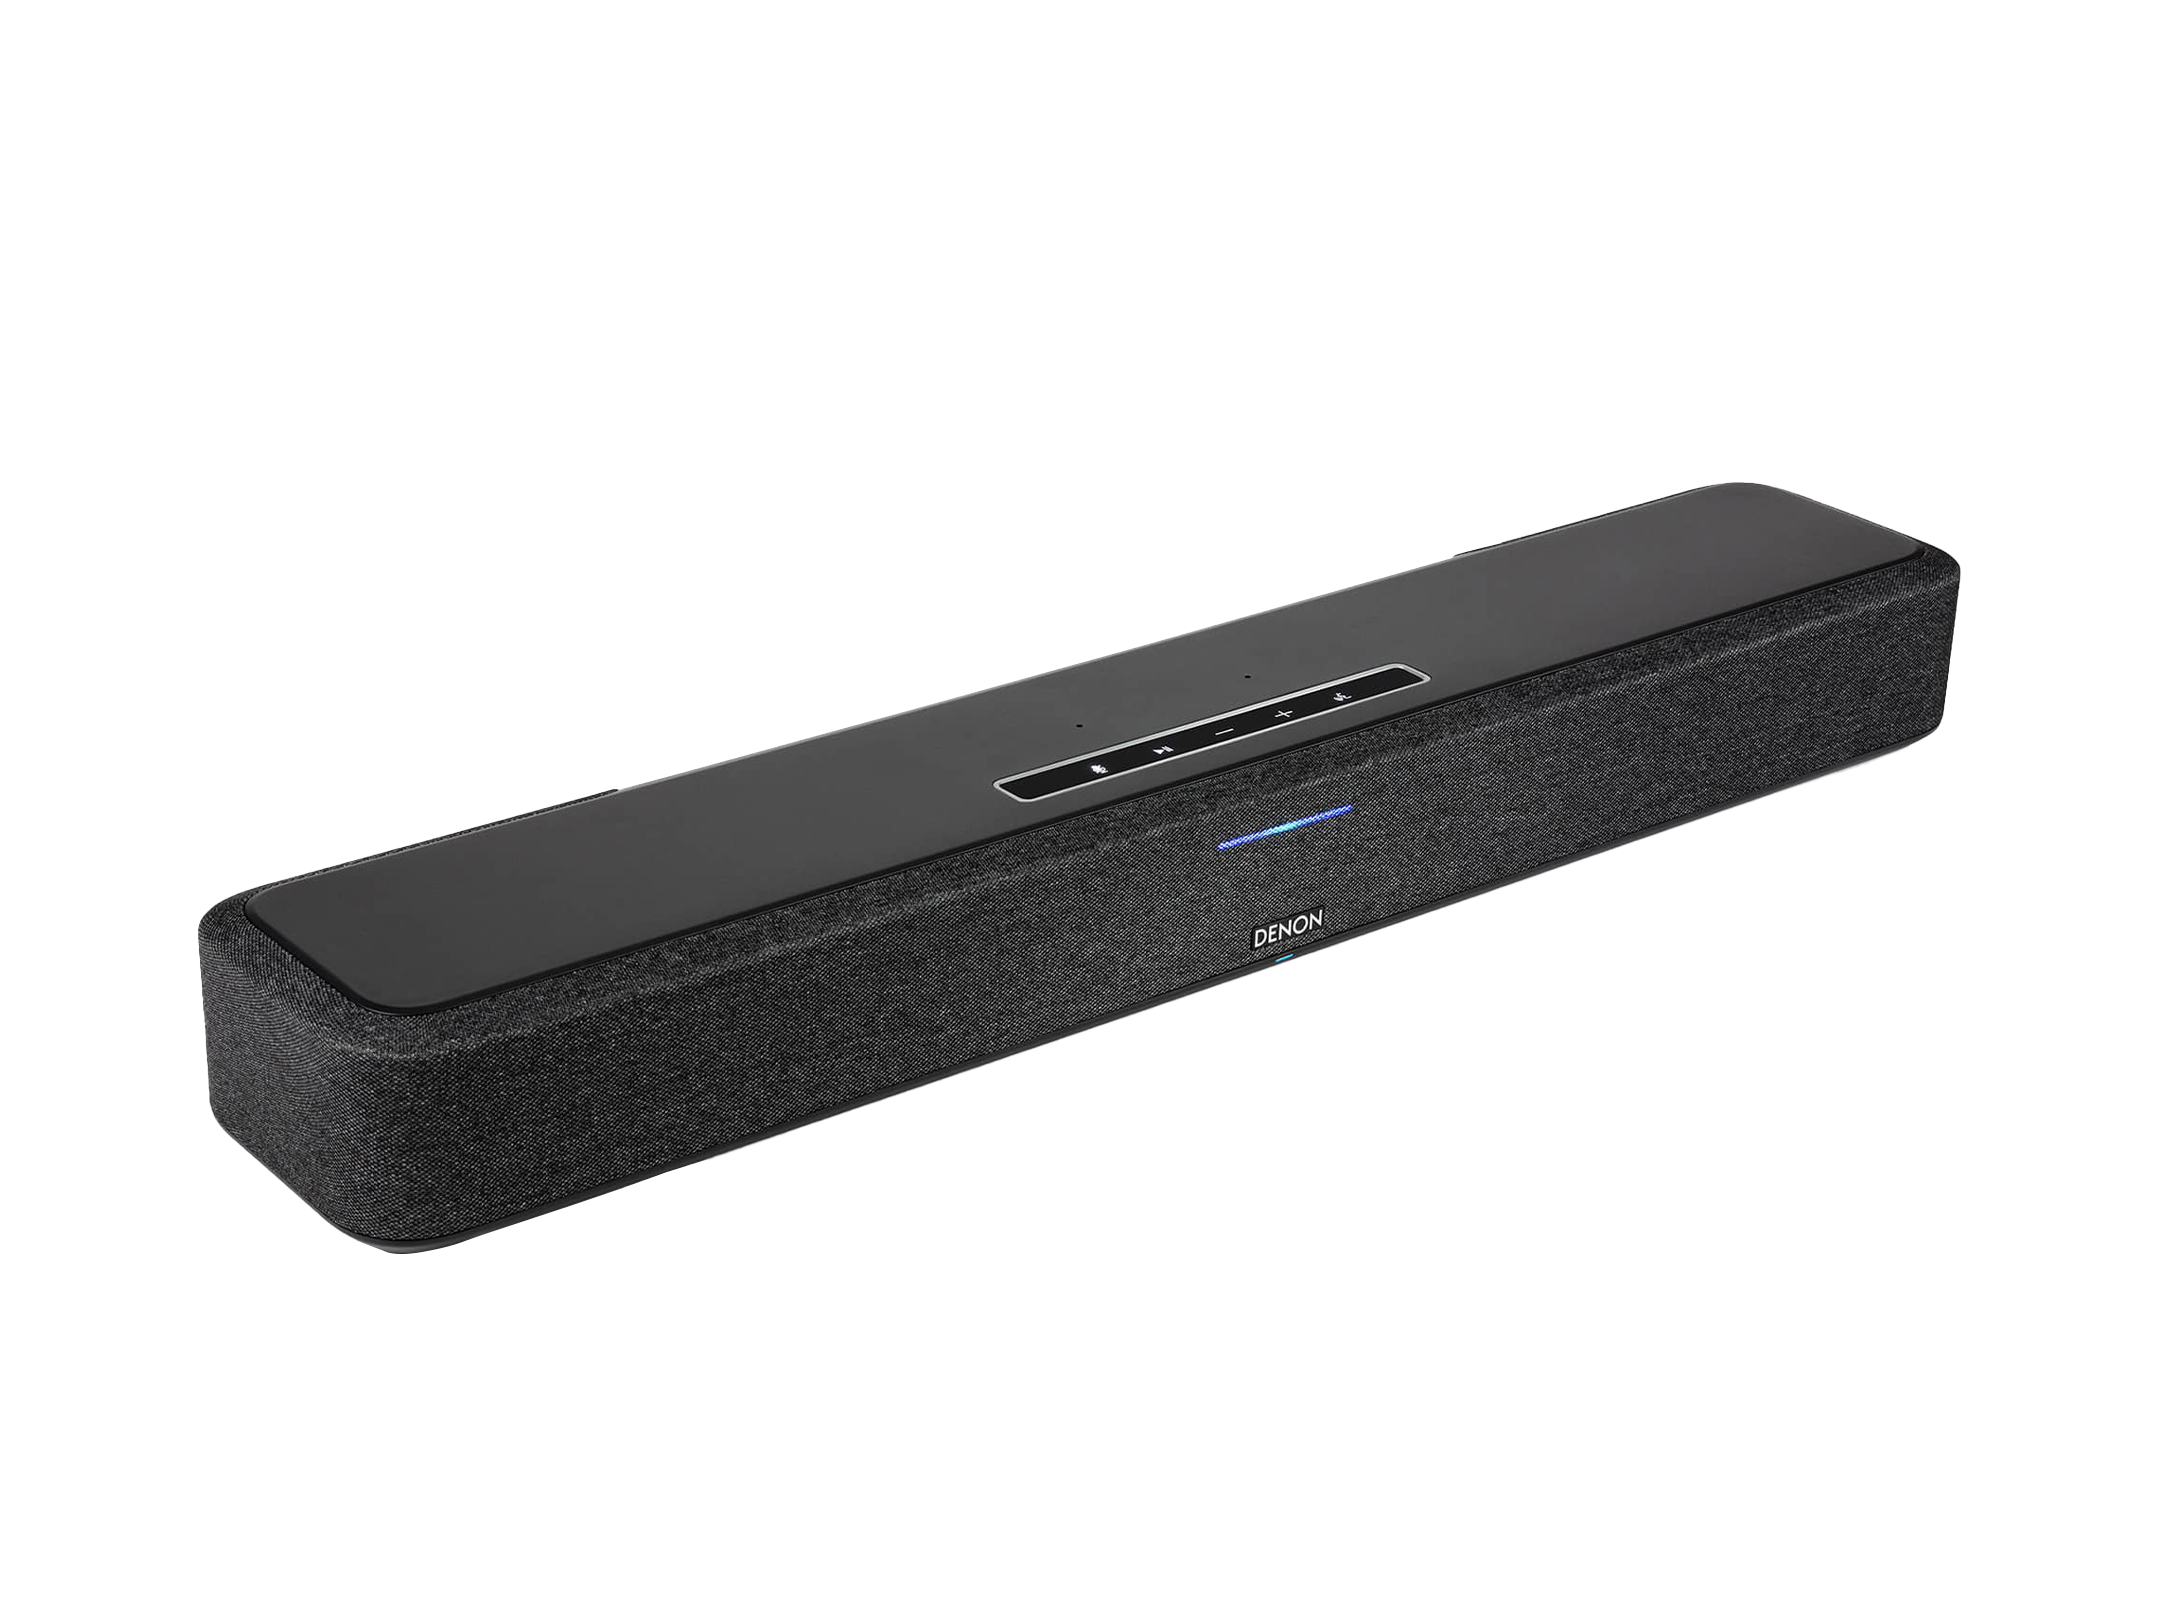 Denon Sound Bar - Smart Sound Bar with Dolby and HEOS® Built-in | Denon - US